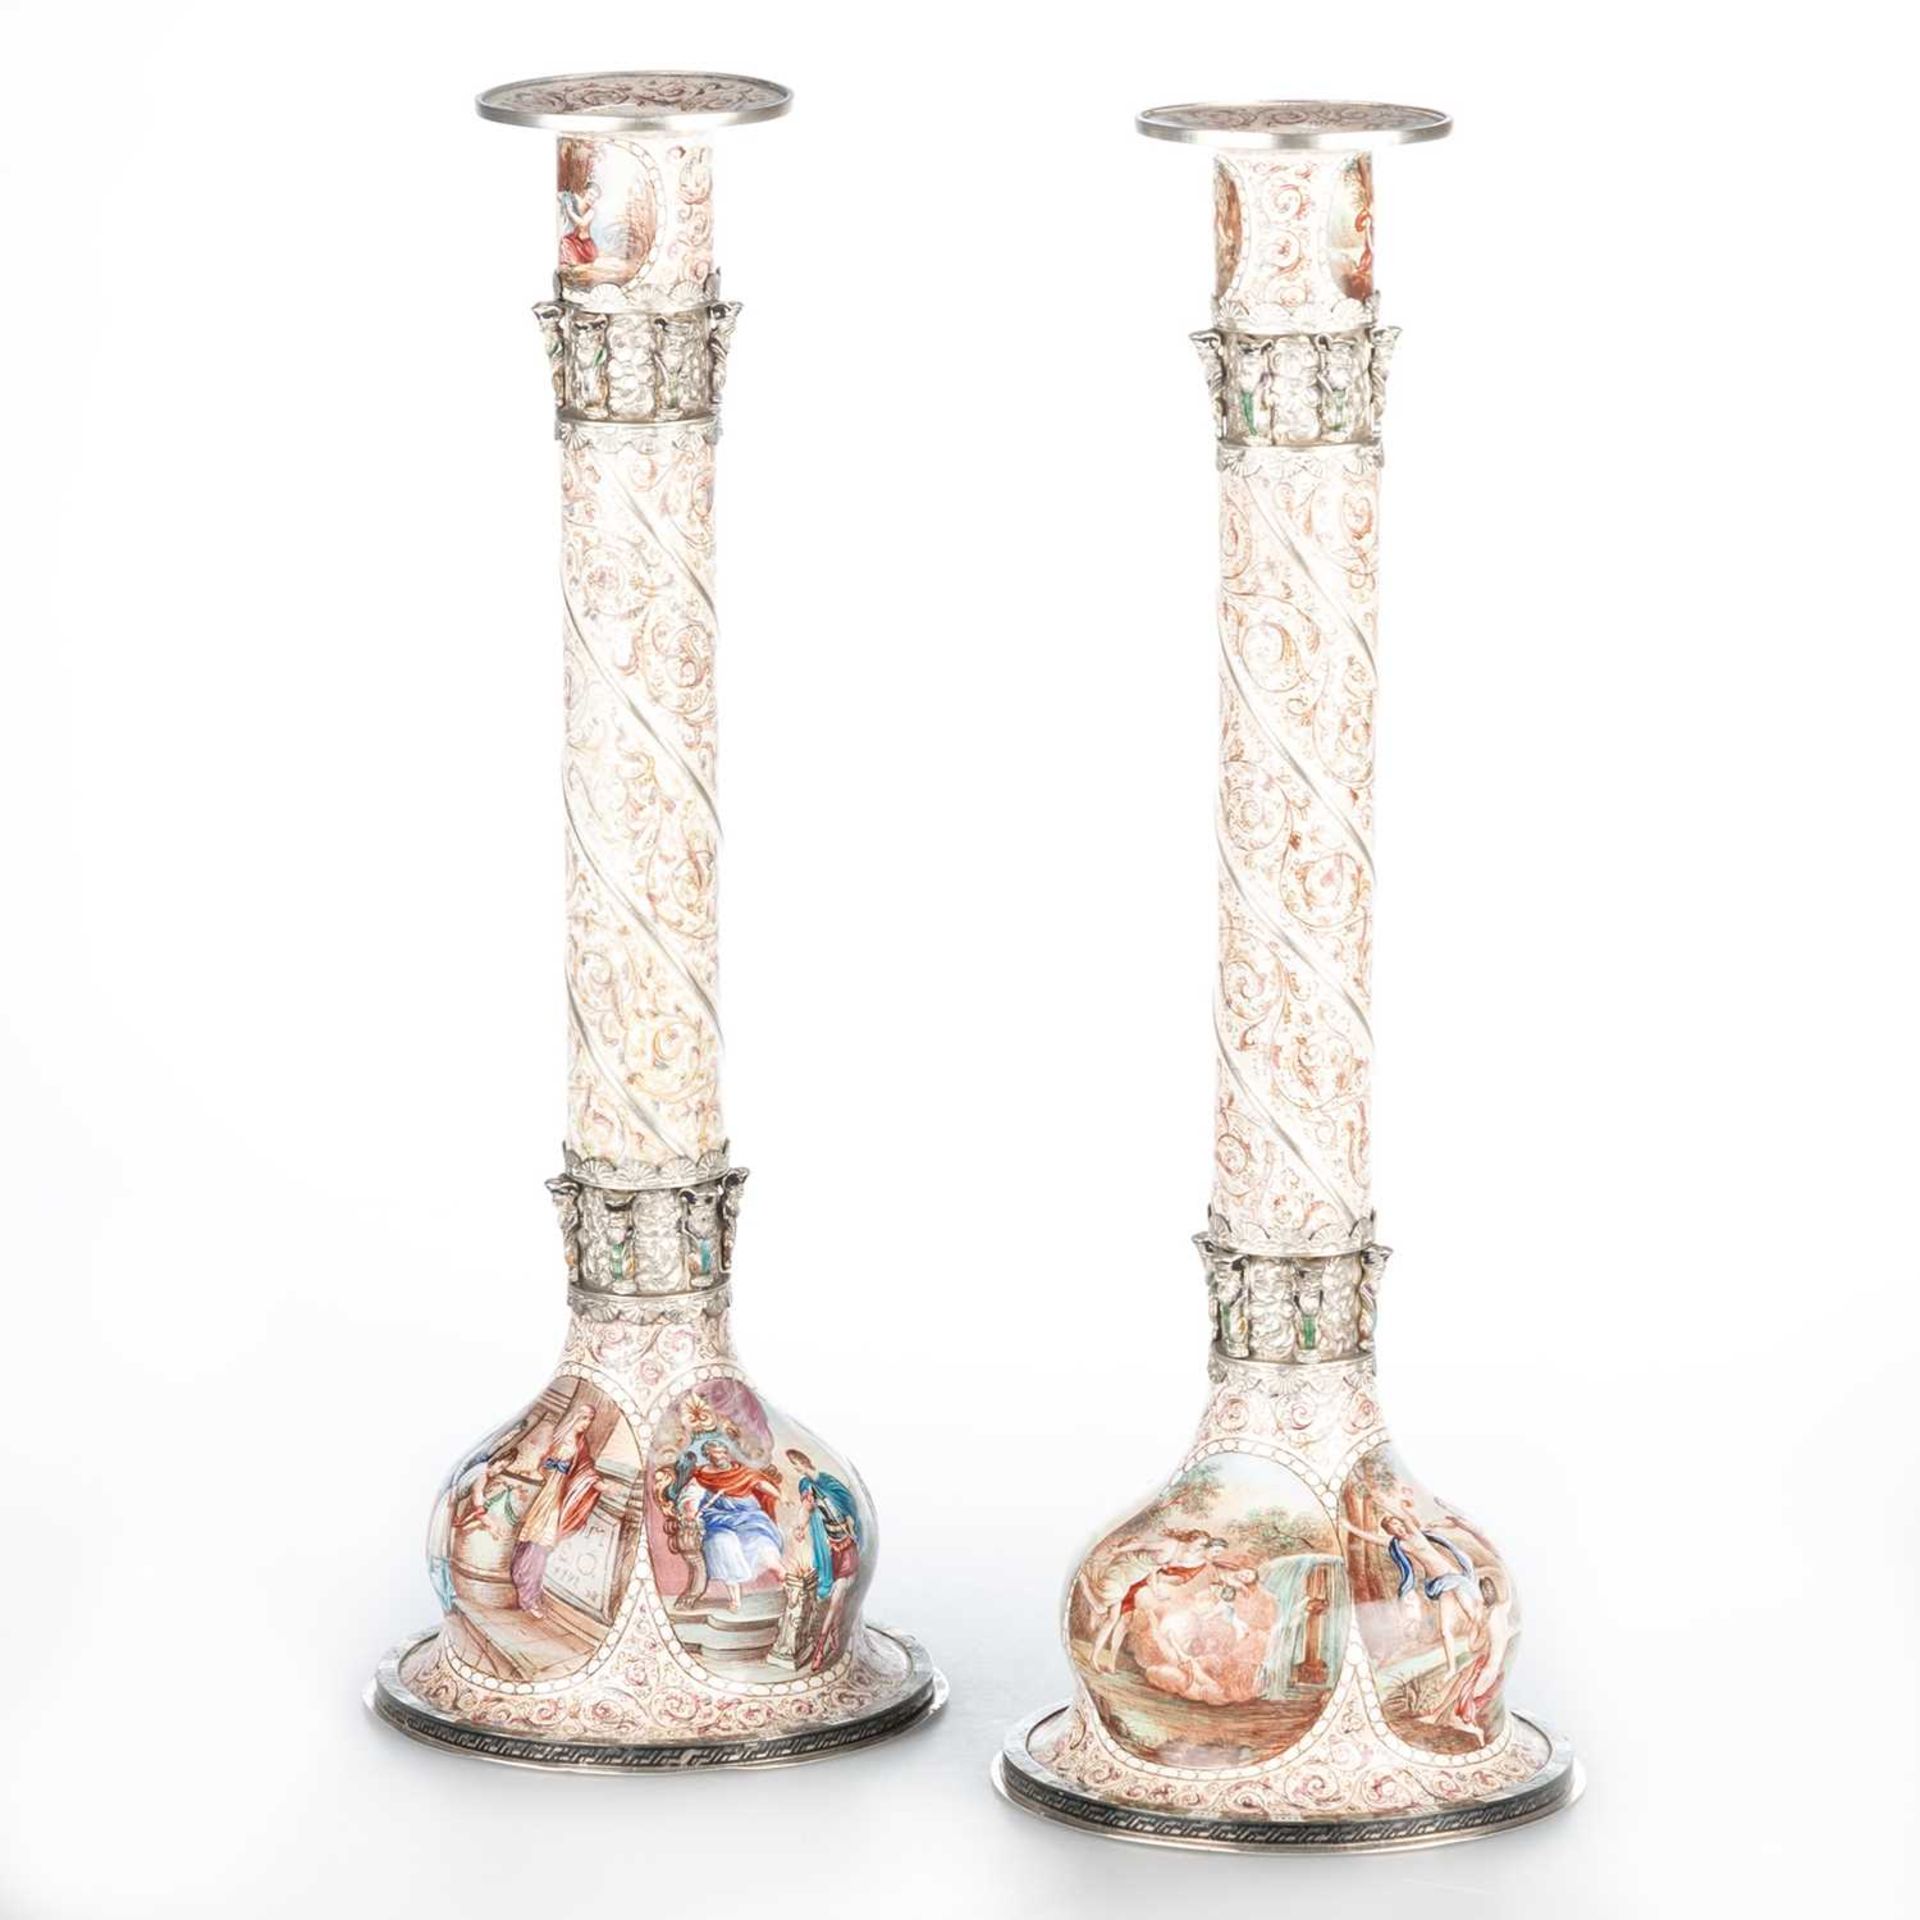 A FINE PAIR OF AUSTRIAN SILVER AND ENAMEL CANDLESTICKS - Image 2 of 3